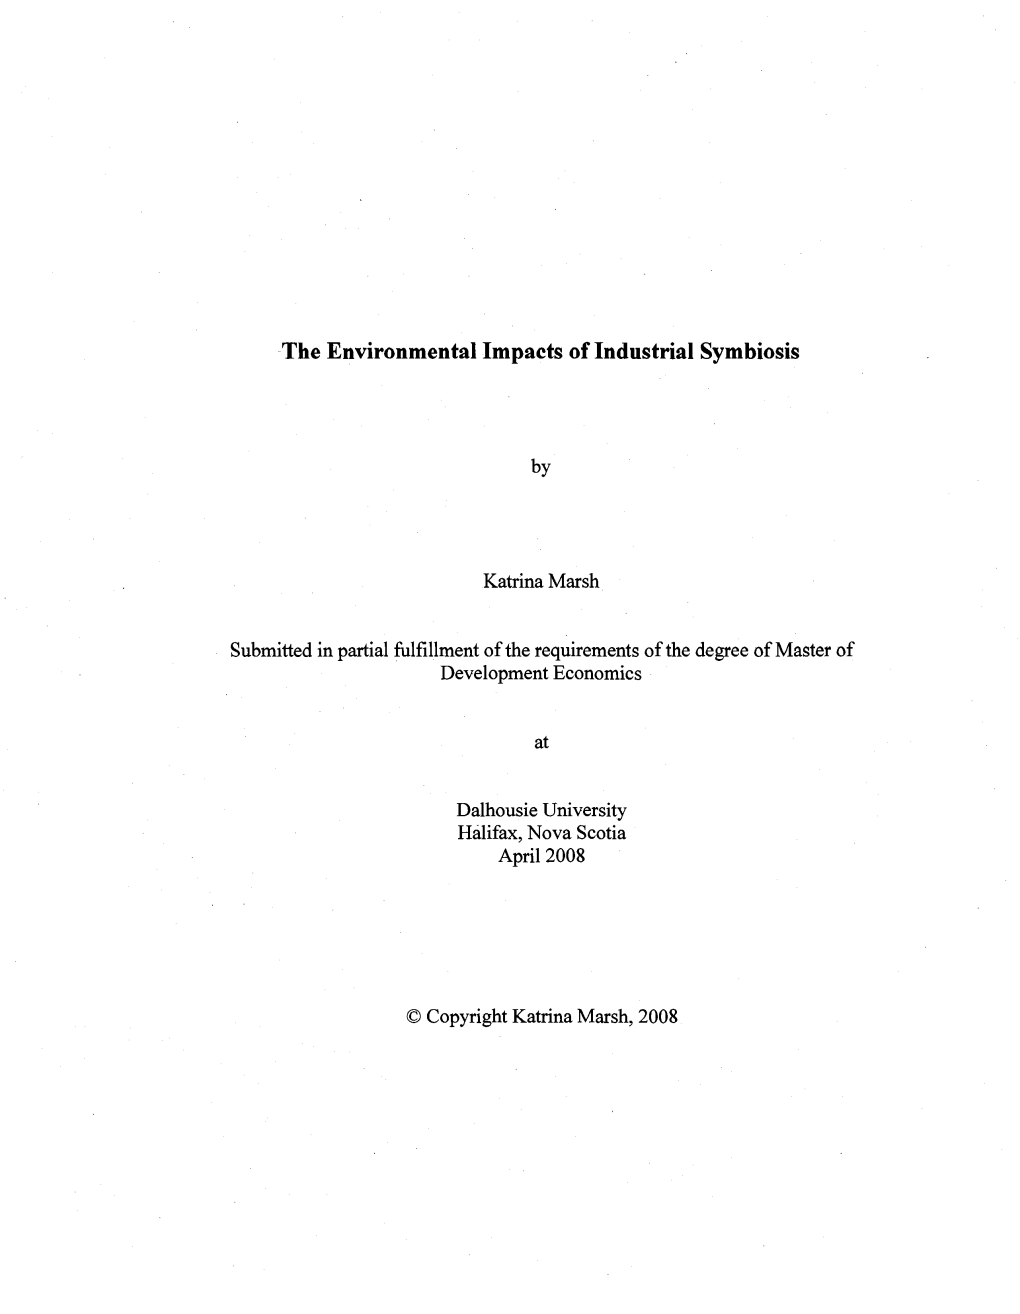 The Environmental Impacts of Industrial Symbiosis